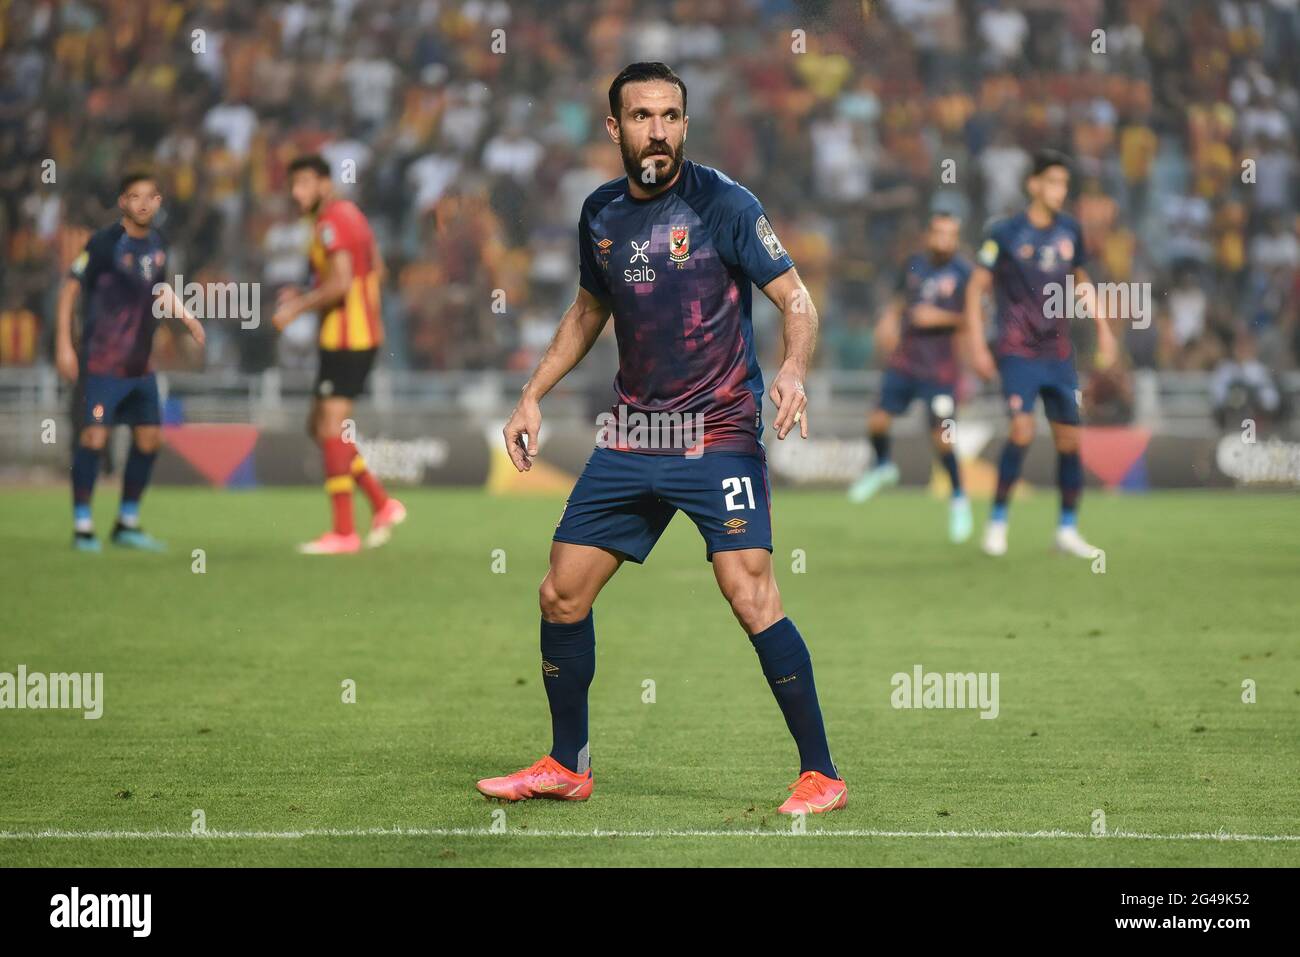 Tunis, Tunisia. 19th June, 2021. Ali Maaloul in action during the first leg CAF champions league semi-final football match between Tunisia's Esperance Sportive de Tunis and Egypt's al-Ahly at the Olympic Stadium in Rades. (Final score; Esperance sportive 0: 1 Egypt's al-Ahly). (Photo by Jdidi wassim/SOPA Images/Sipa USA) Credit: Sipa USA/Alamy Live News Stock Photo